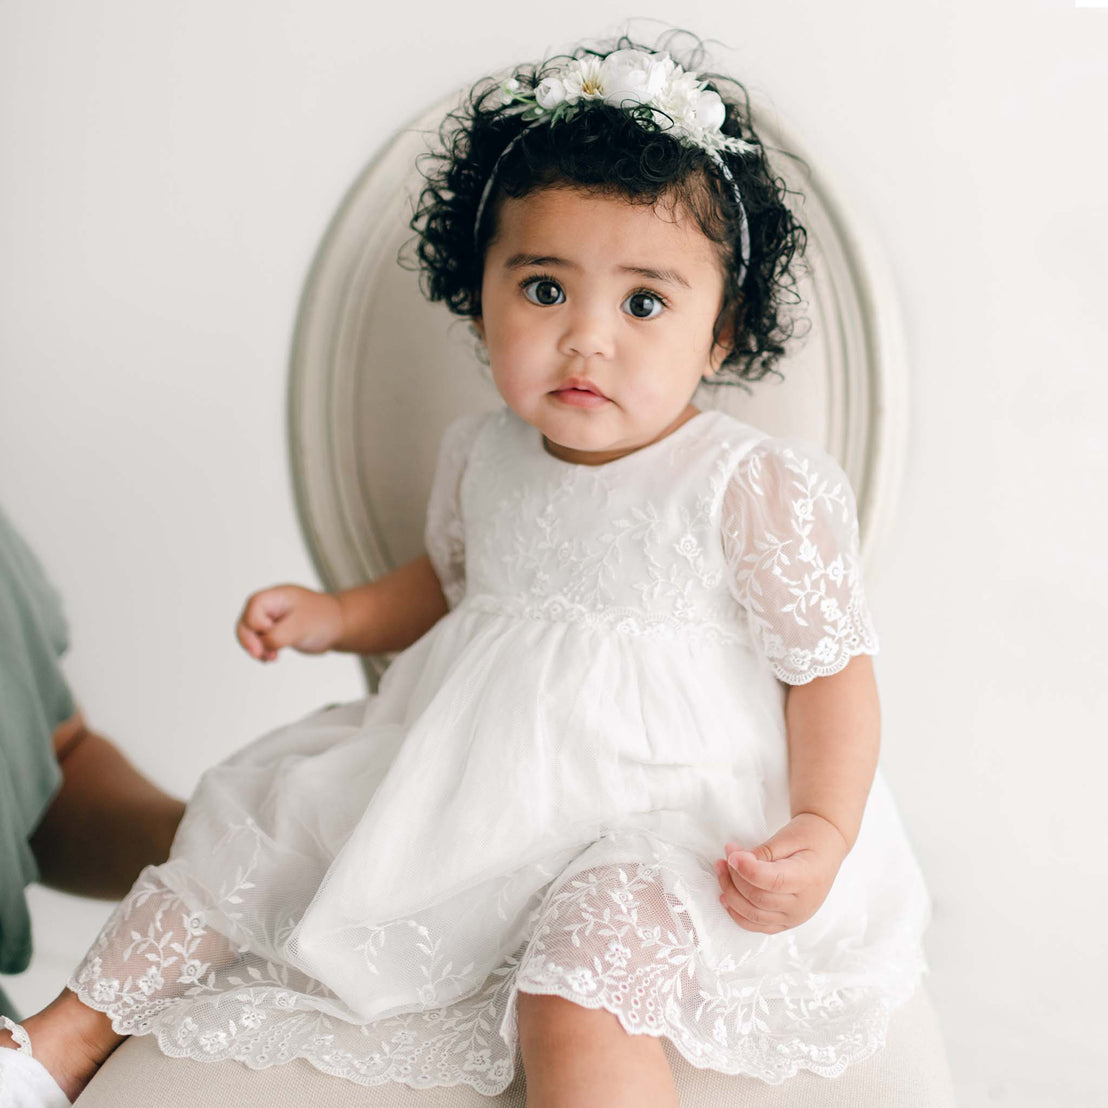 A baby girl with curly hair and big eyes, wearing an Ella Romper Dress with floral embroidered netting lace, sits on a vintage chair against a white backdrop.